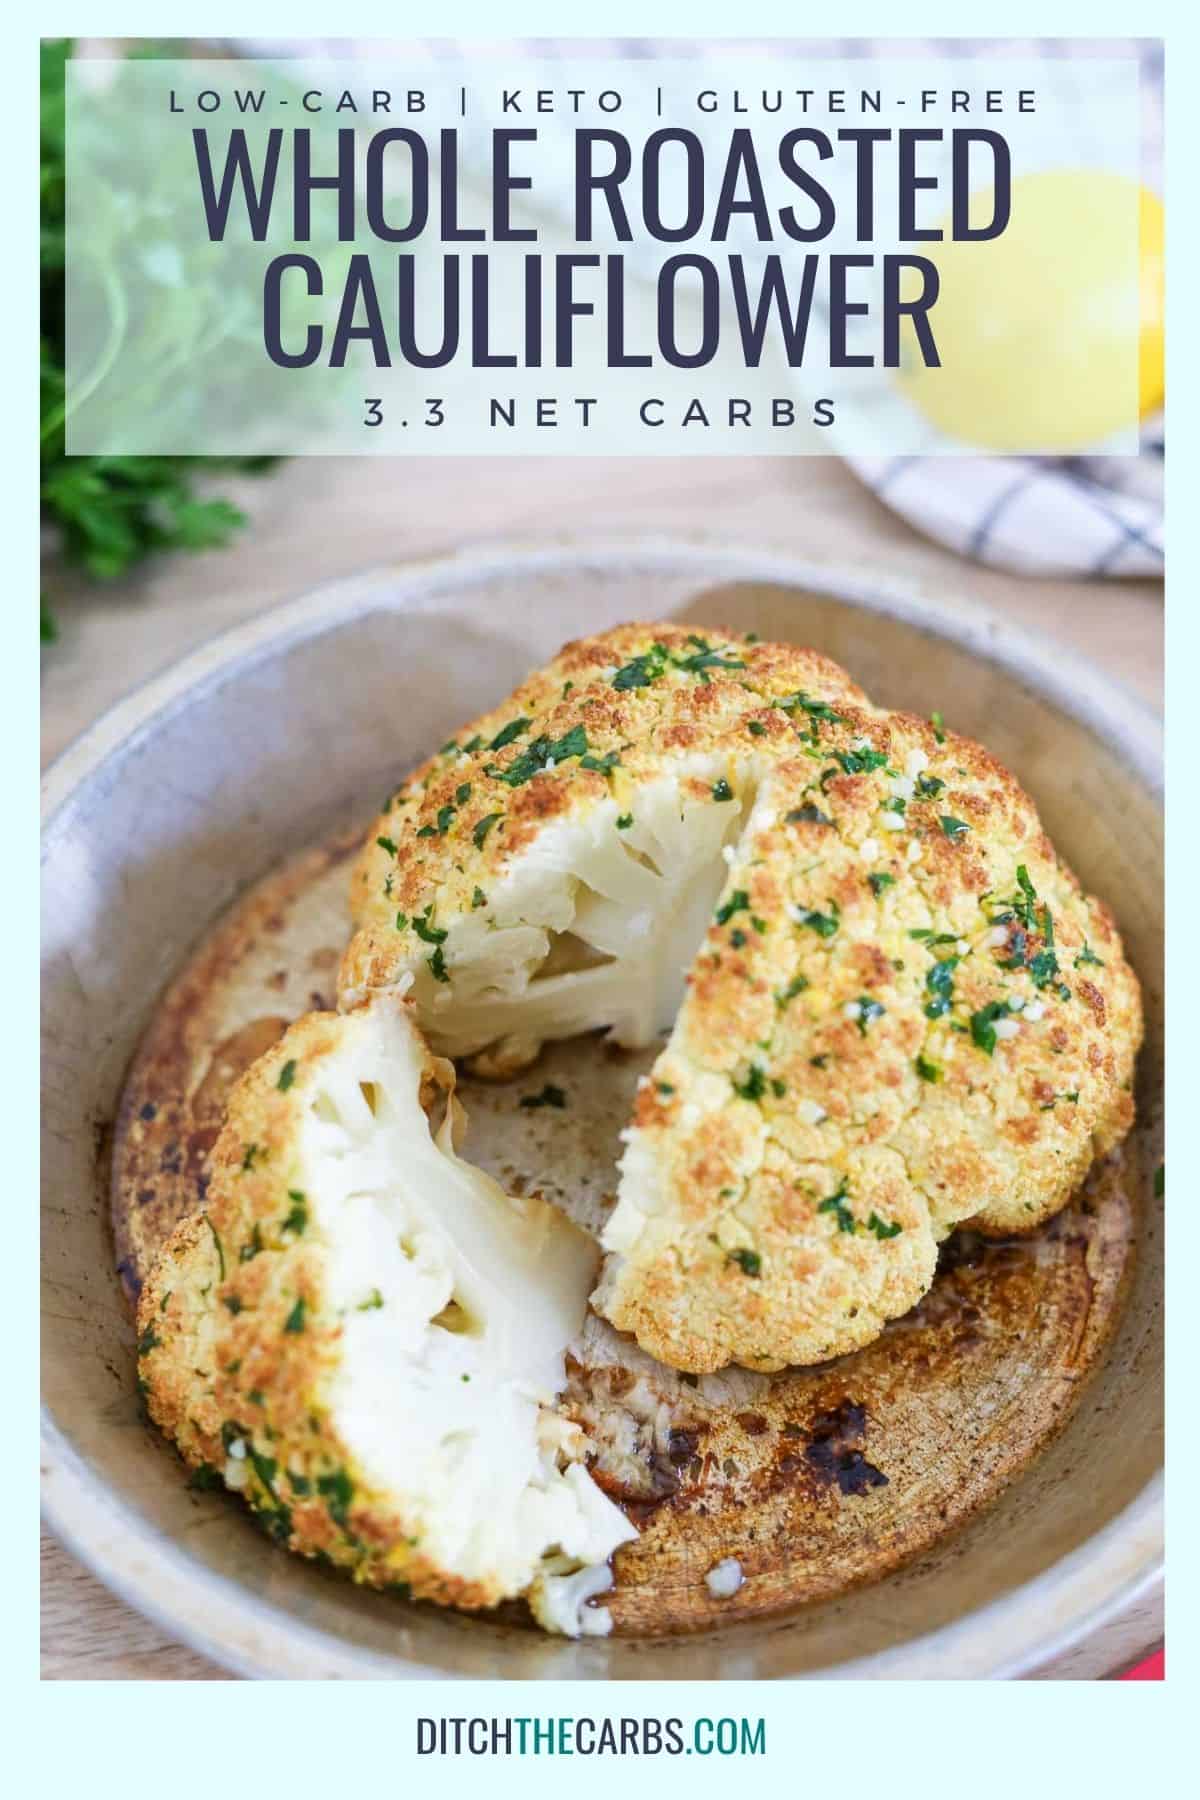 sliced whole roasted cauliflower on a white plate with herbs